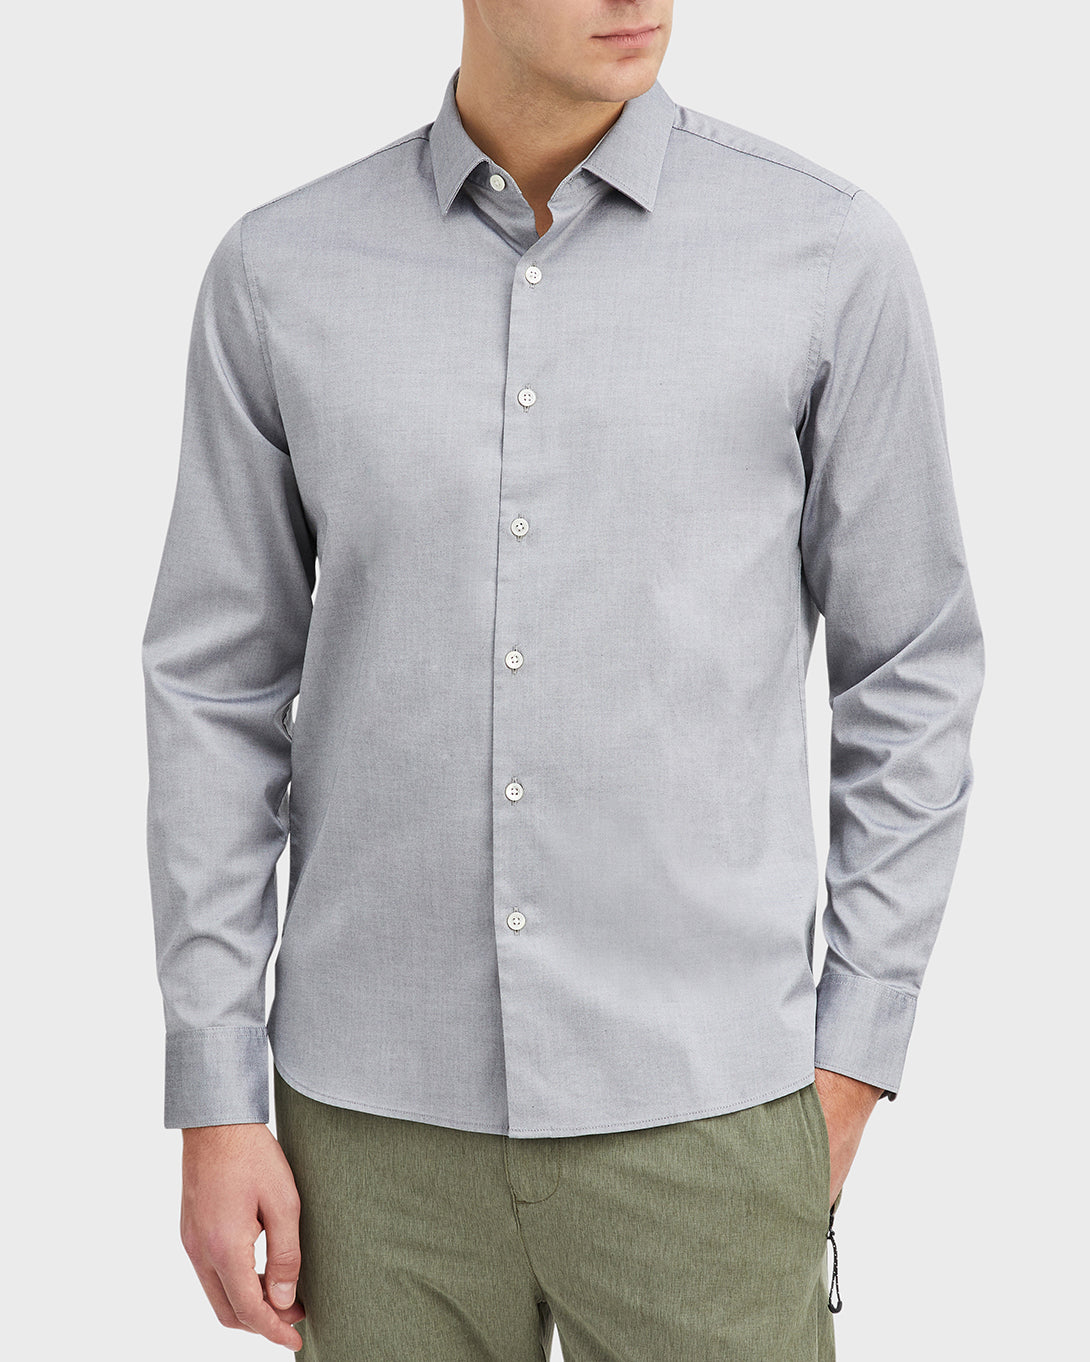 Gray Adrian Pinpoint Oxford Shirt Men’s cotton shirts ONS Clothing